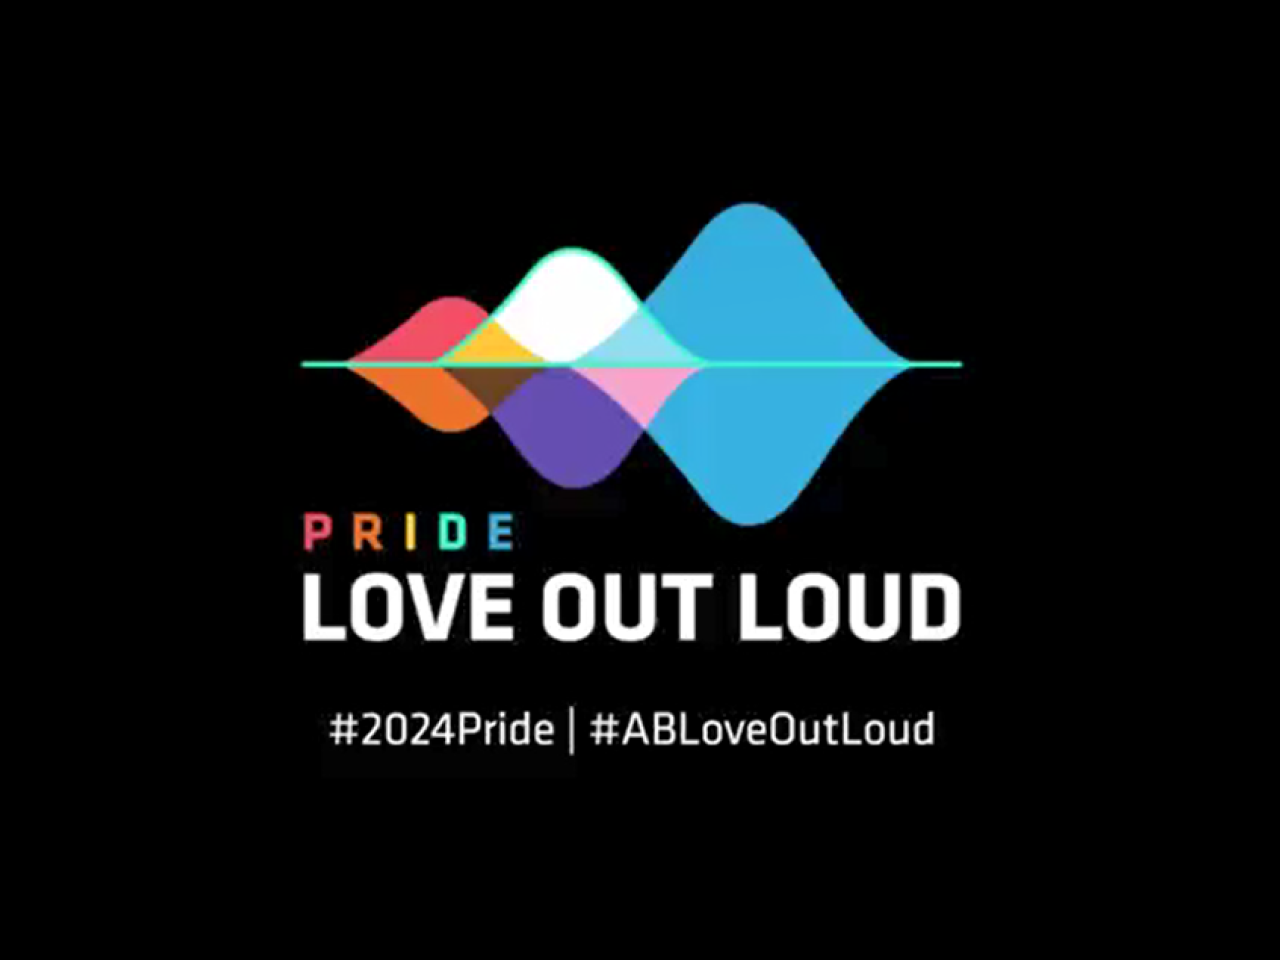 Colorful sound waves and "PRIDE. Love Out Loud. #2024pride | #ABLoveoutloud